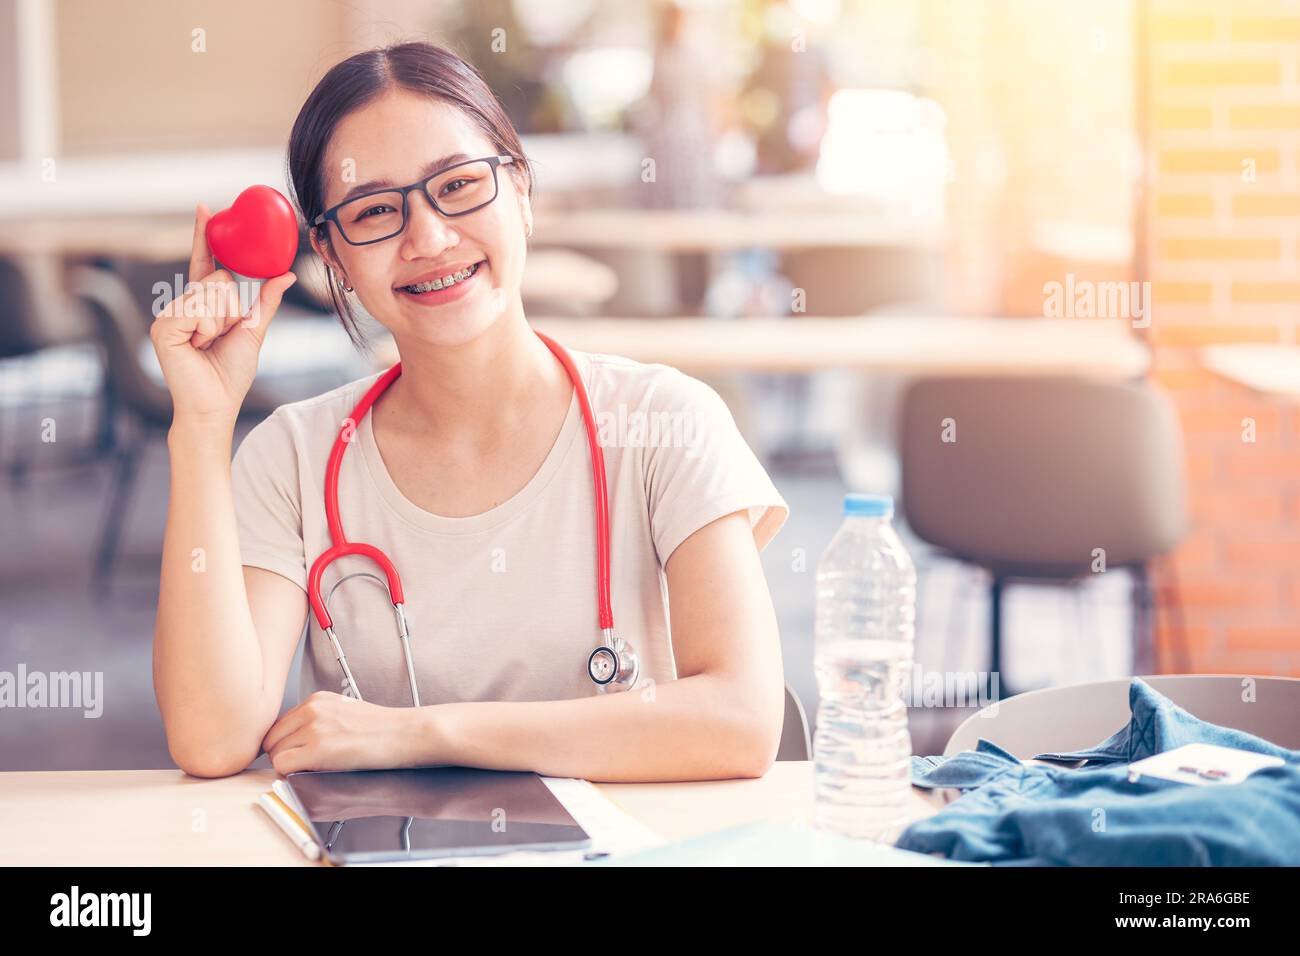 Happy cardio doctor student with red heart sign for sharing love healtcare to people concept. Stock Photo